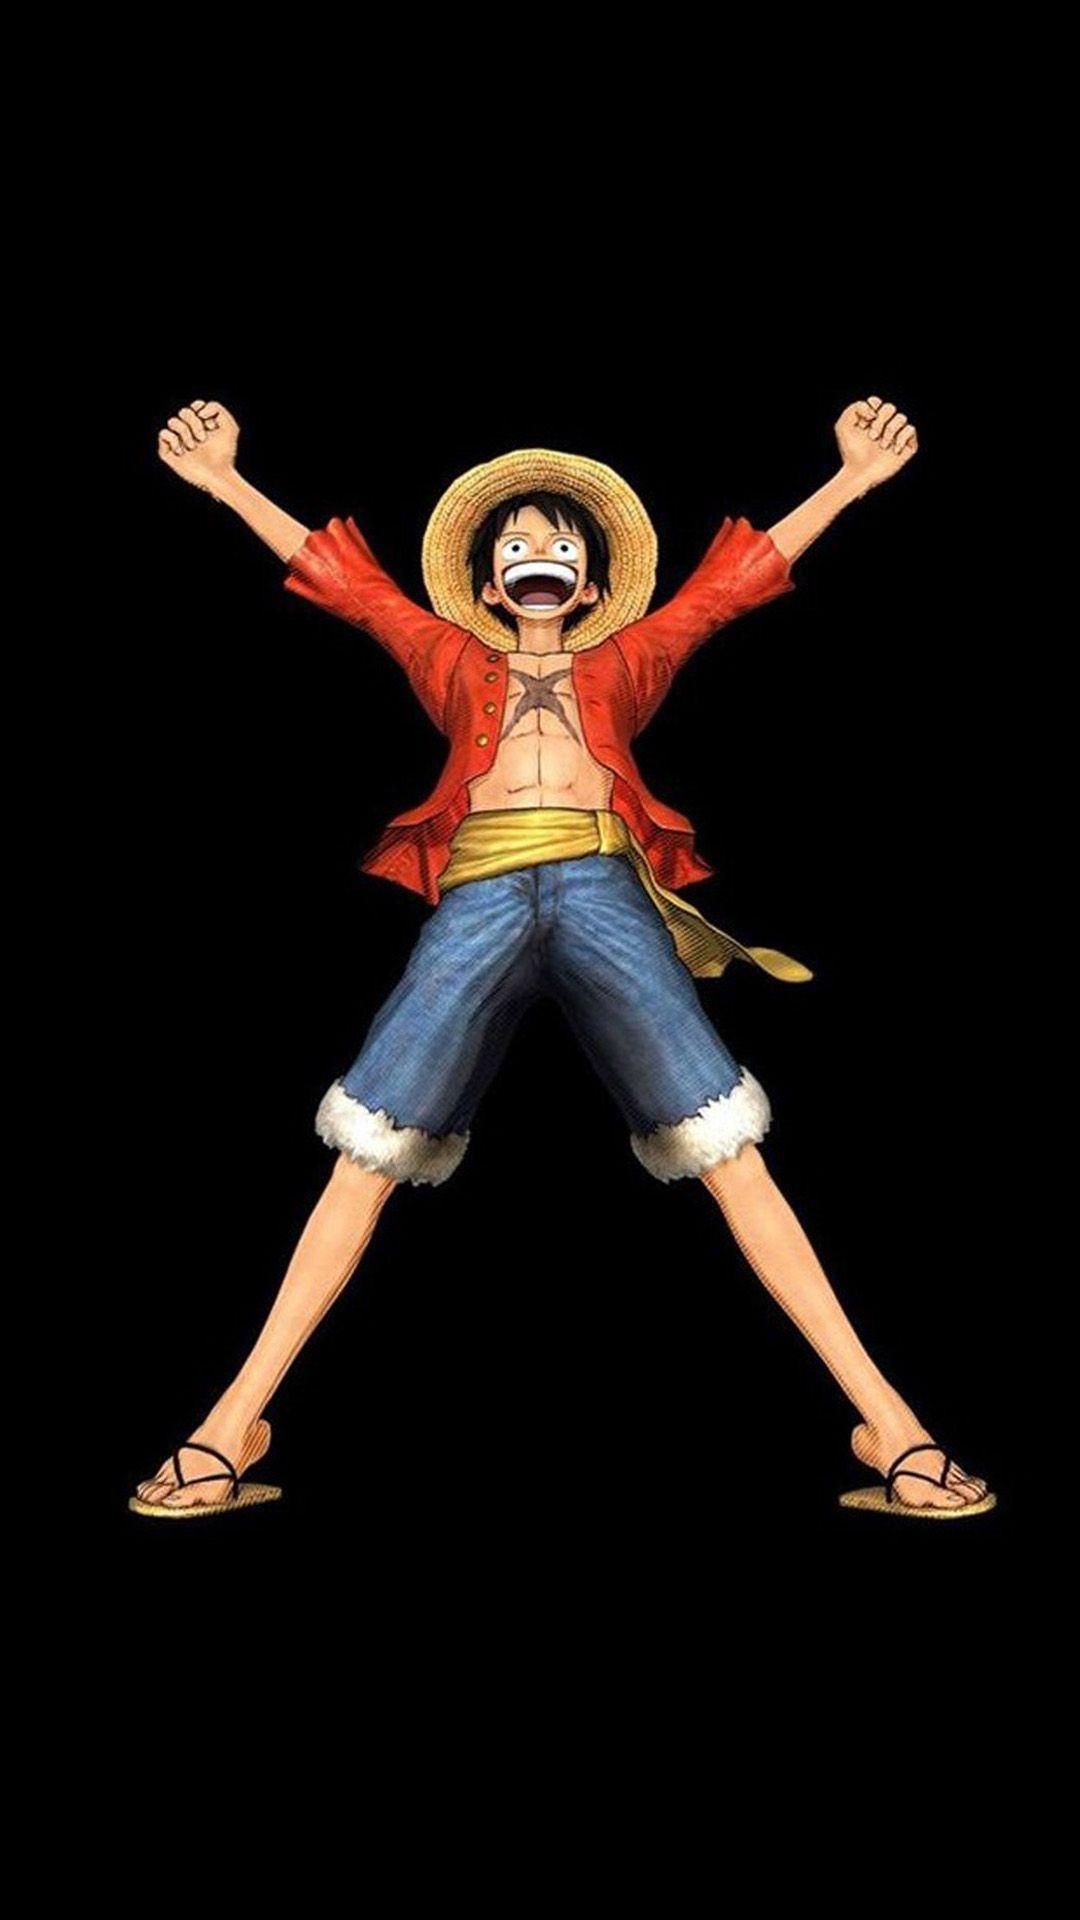 Wallpaper.wiki One Piece Anime IPhone Background PIC WPD001446